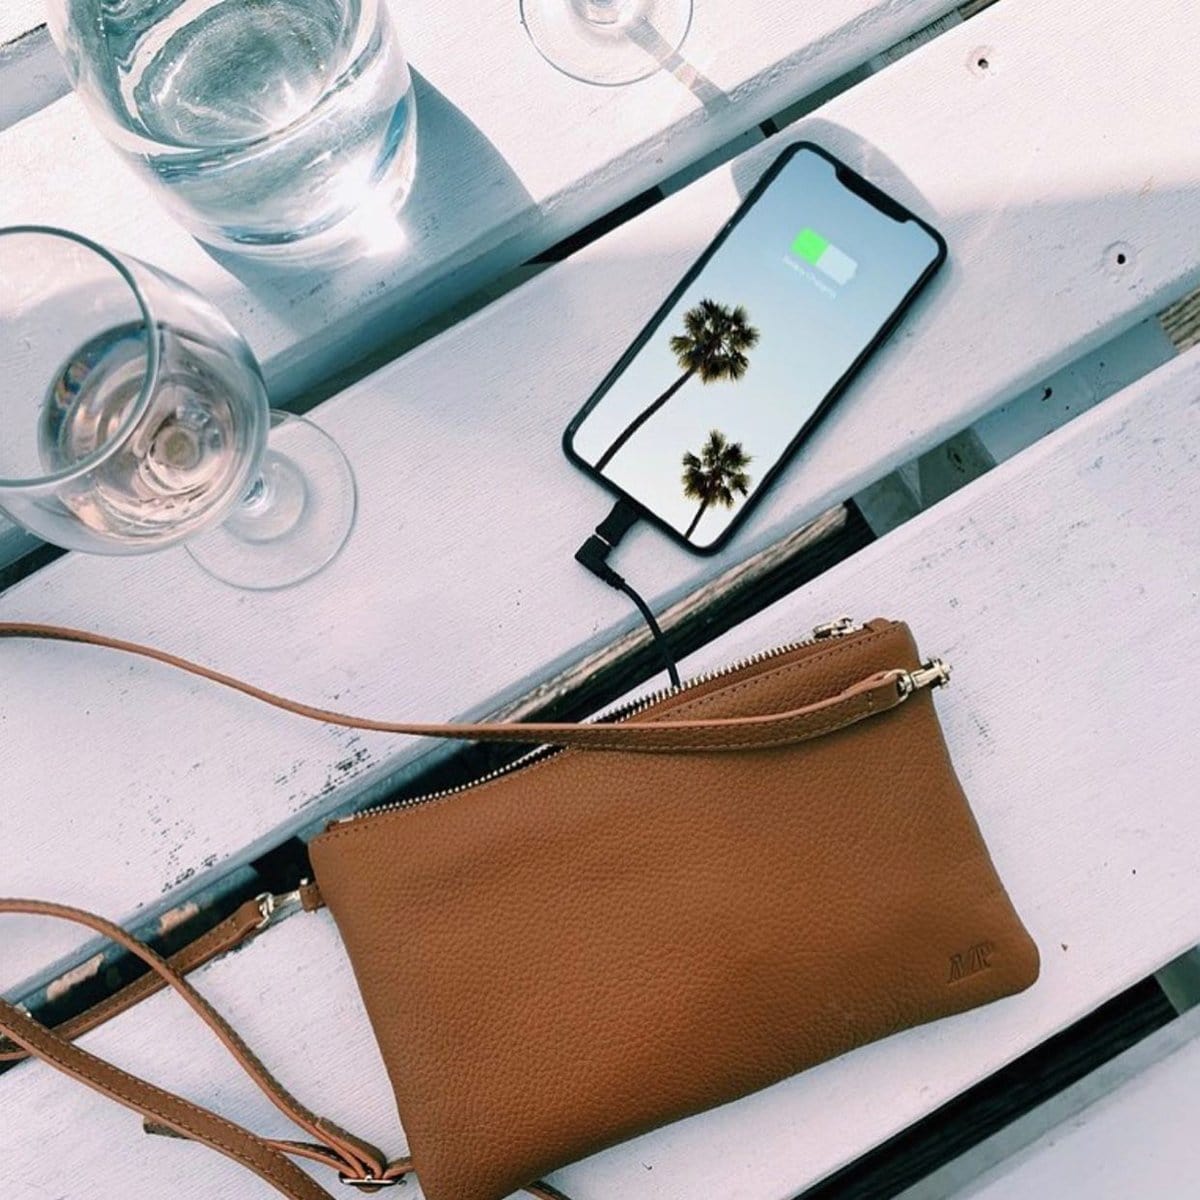 Mighty Purse offers a variety of bags and purses that can charge your phone